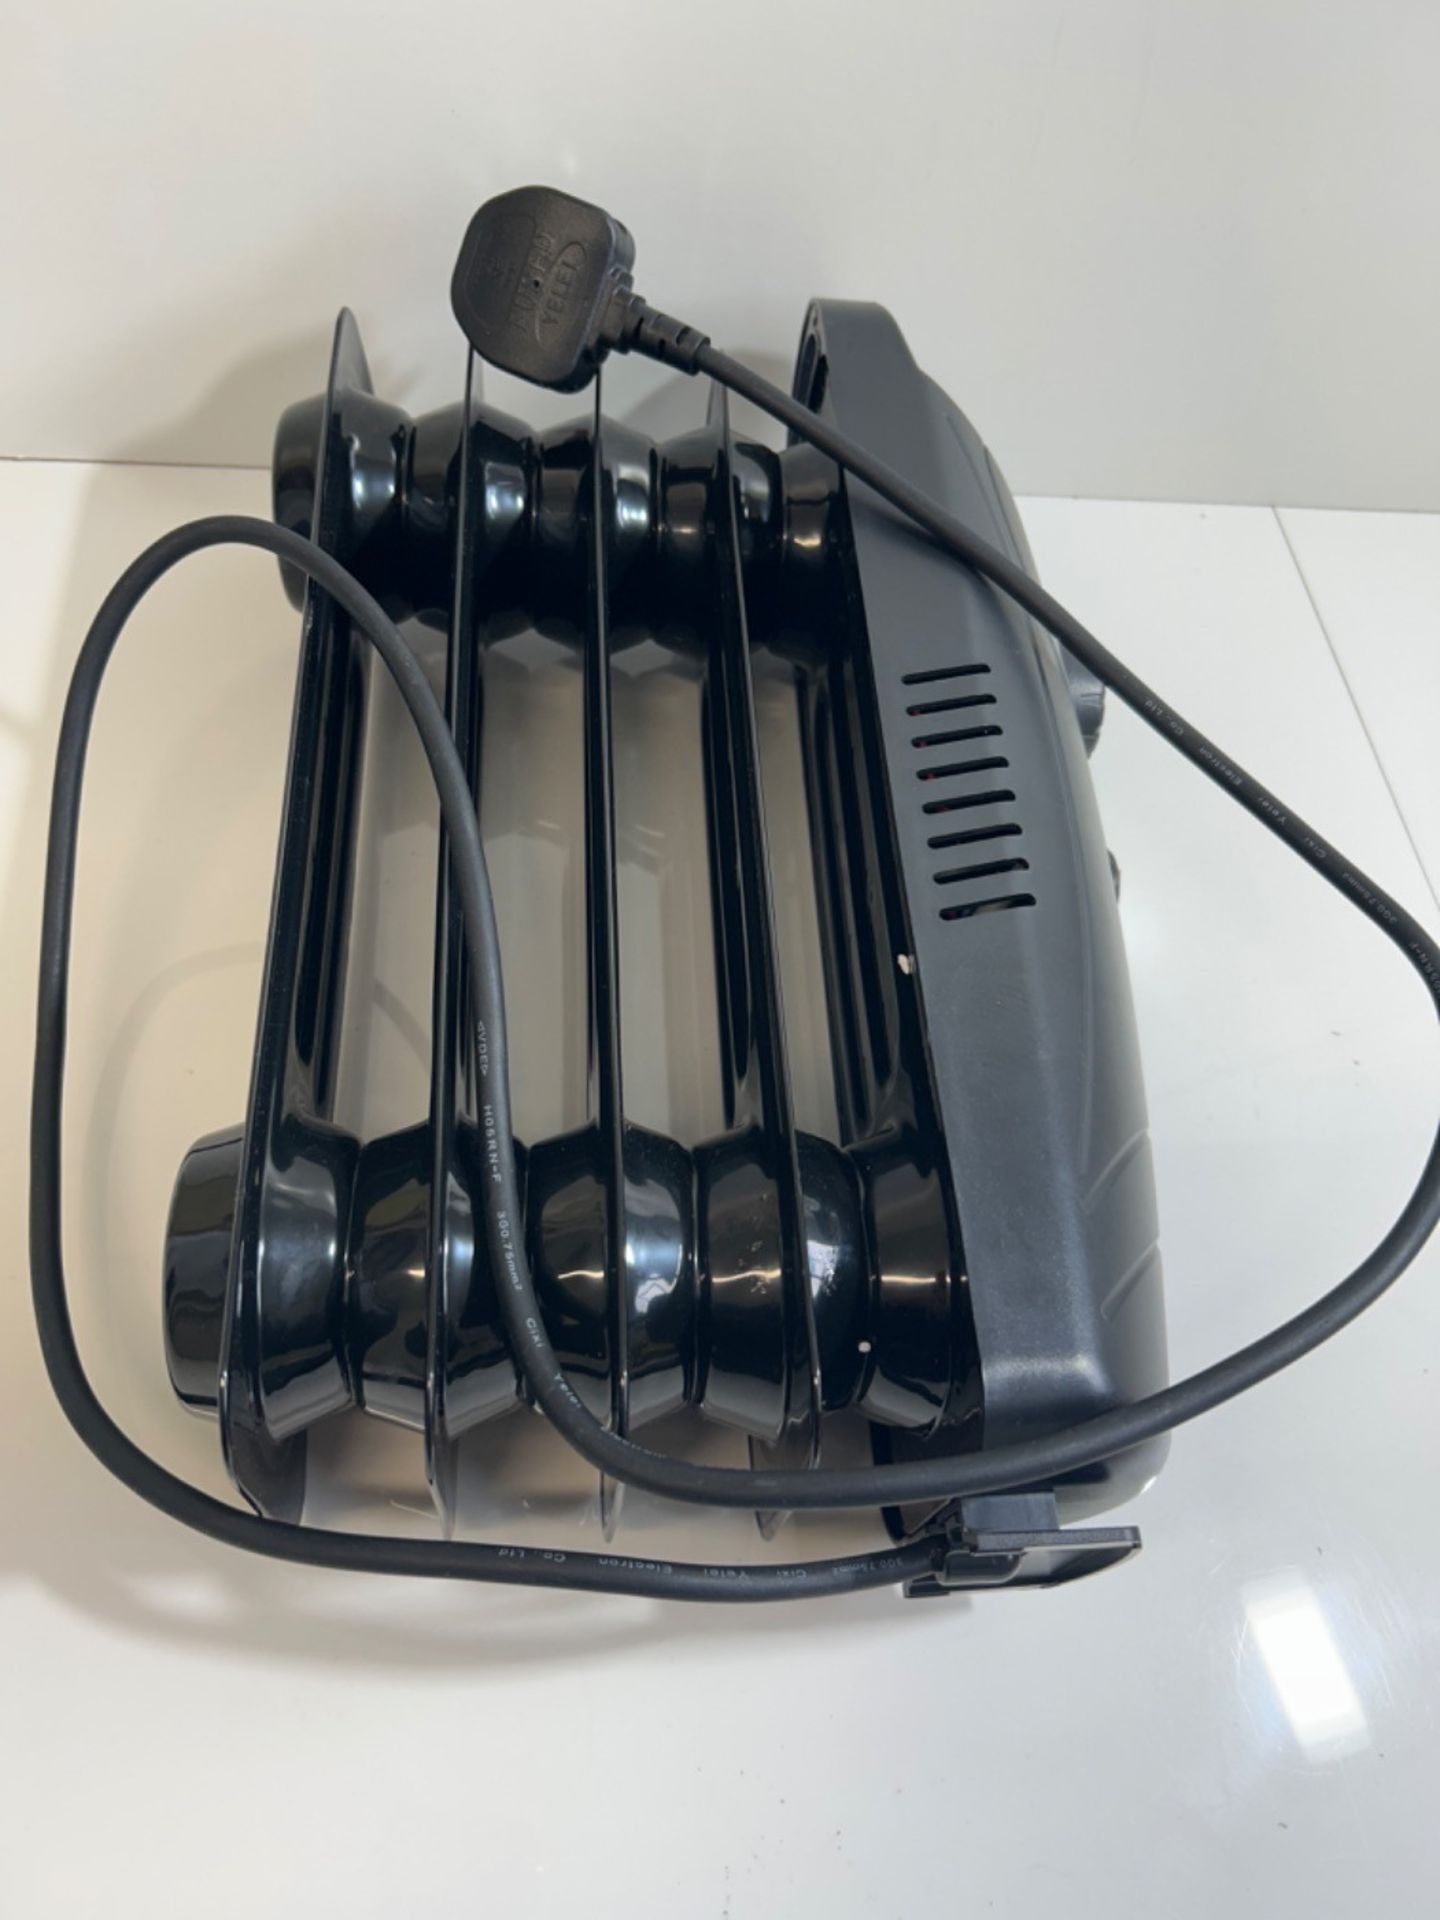 Russell Hobbs 650W Oil Filled Radiator, 5 Fin Portable Electric Heater - Black, Adjustable Thermost - Image 2 of 3